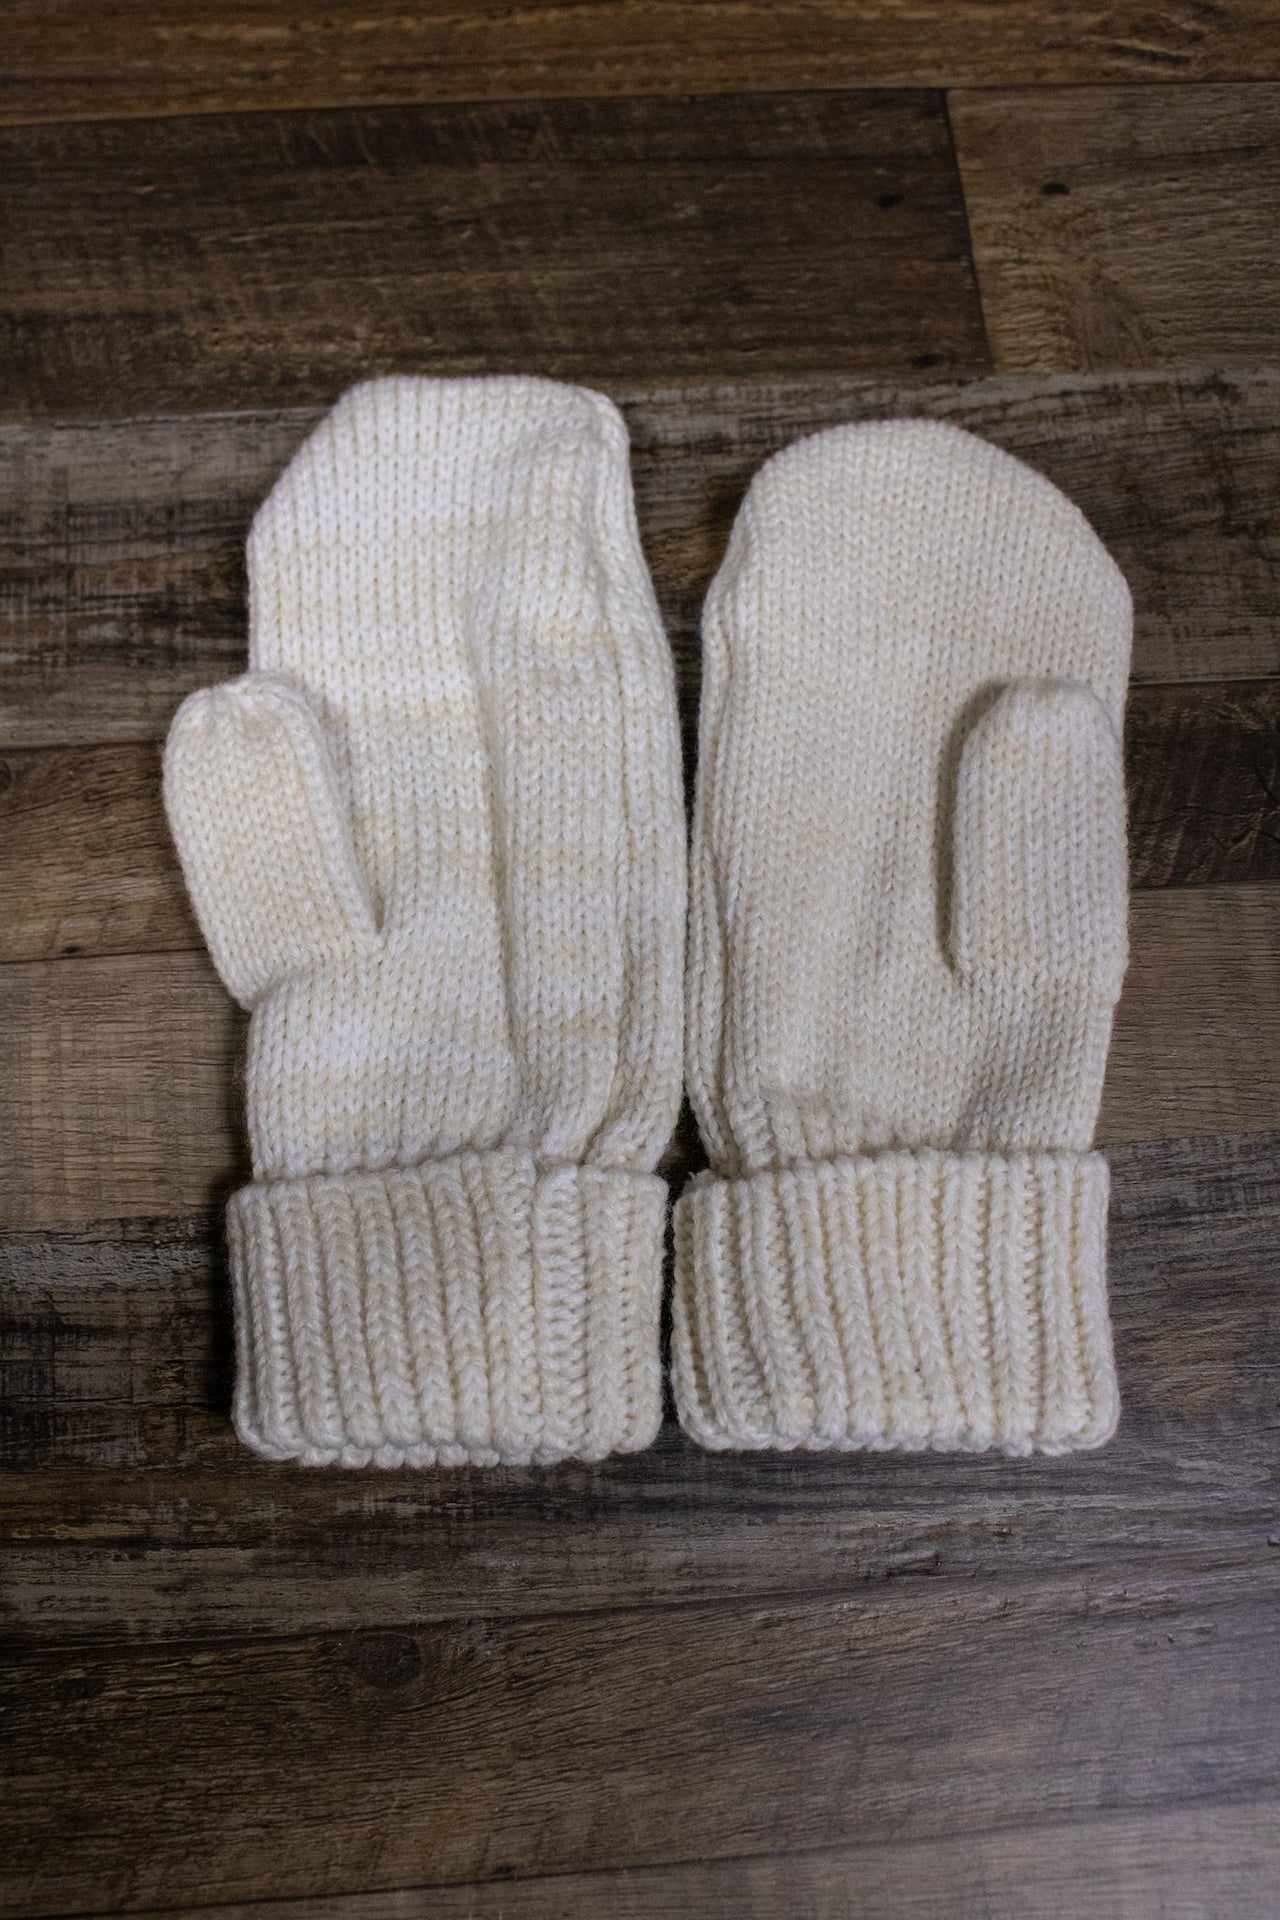 Philadelphia Eagles Meeko cuff mittens are cream and white in color and have a knit cuff and an embroidered Eagle logo on the back of the mitten